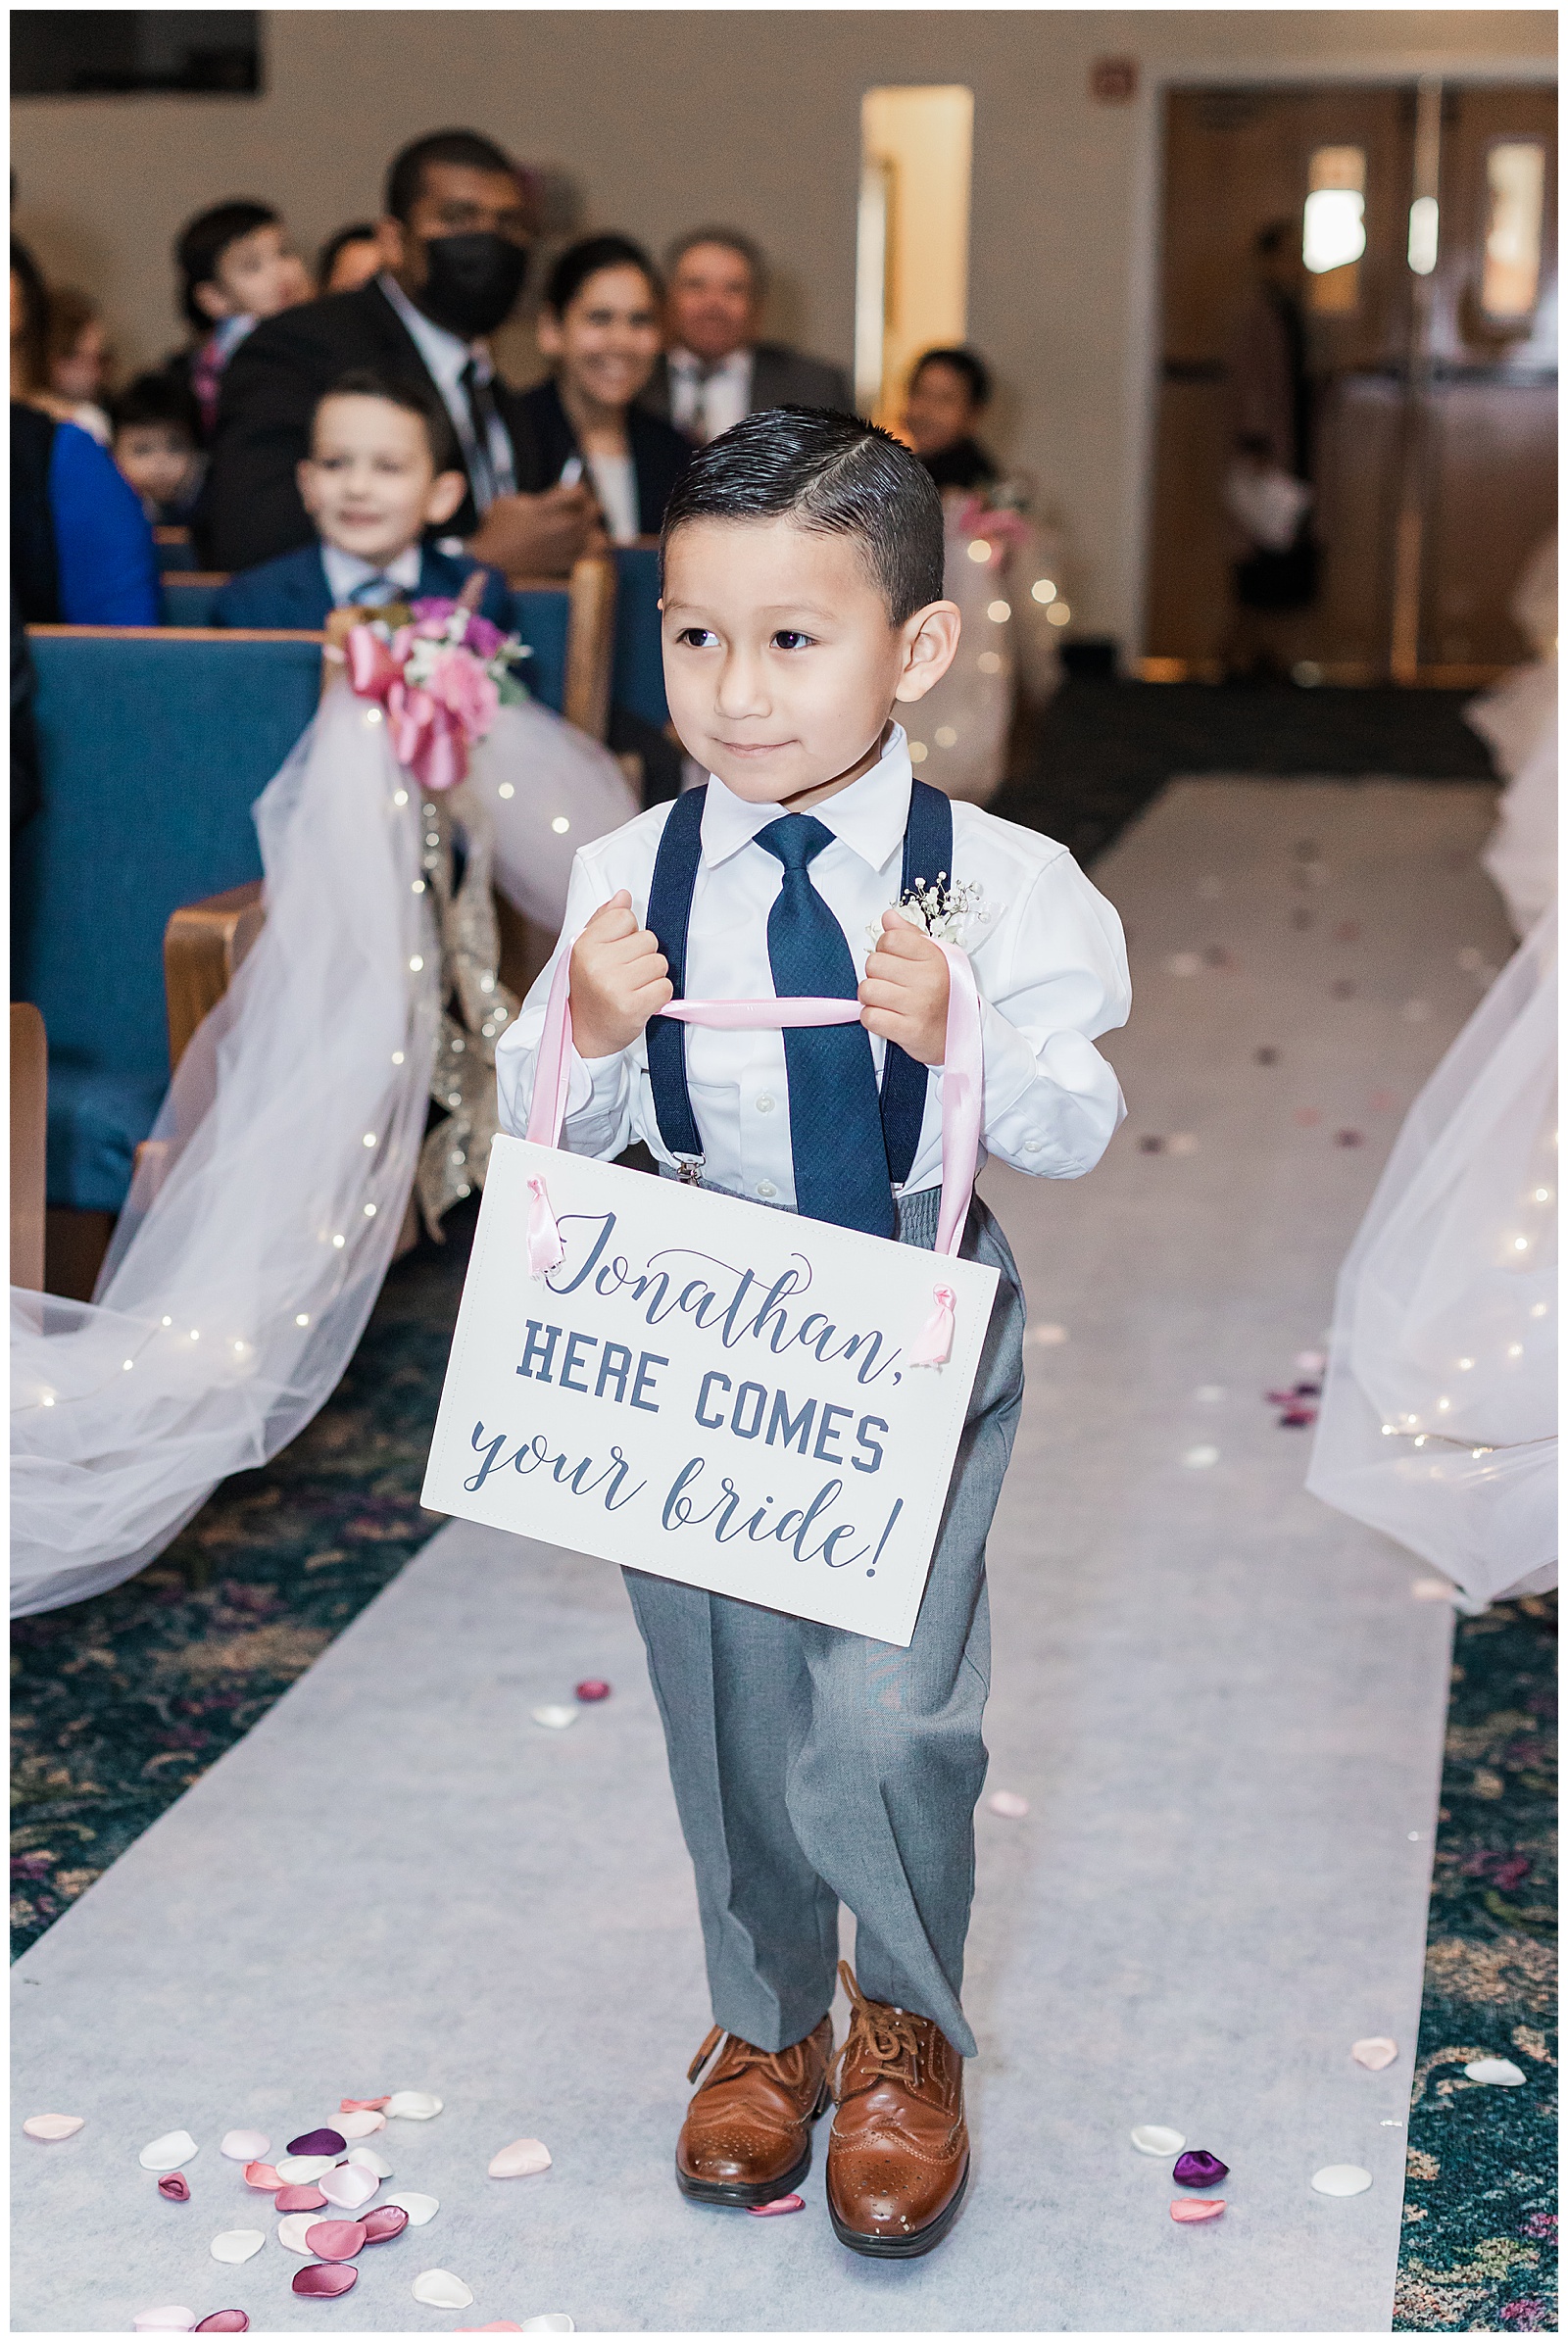 Boy carrying "Here comes your bride!" sign